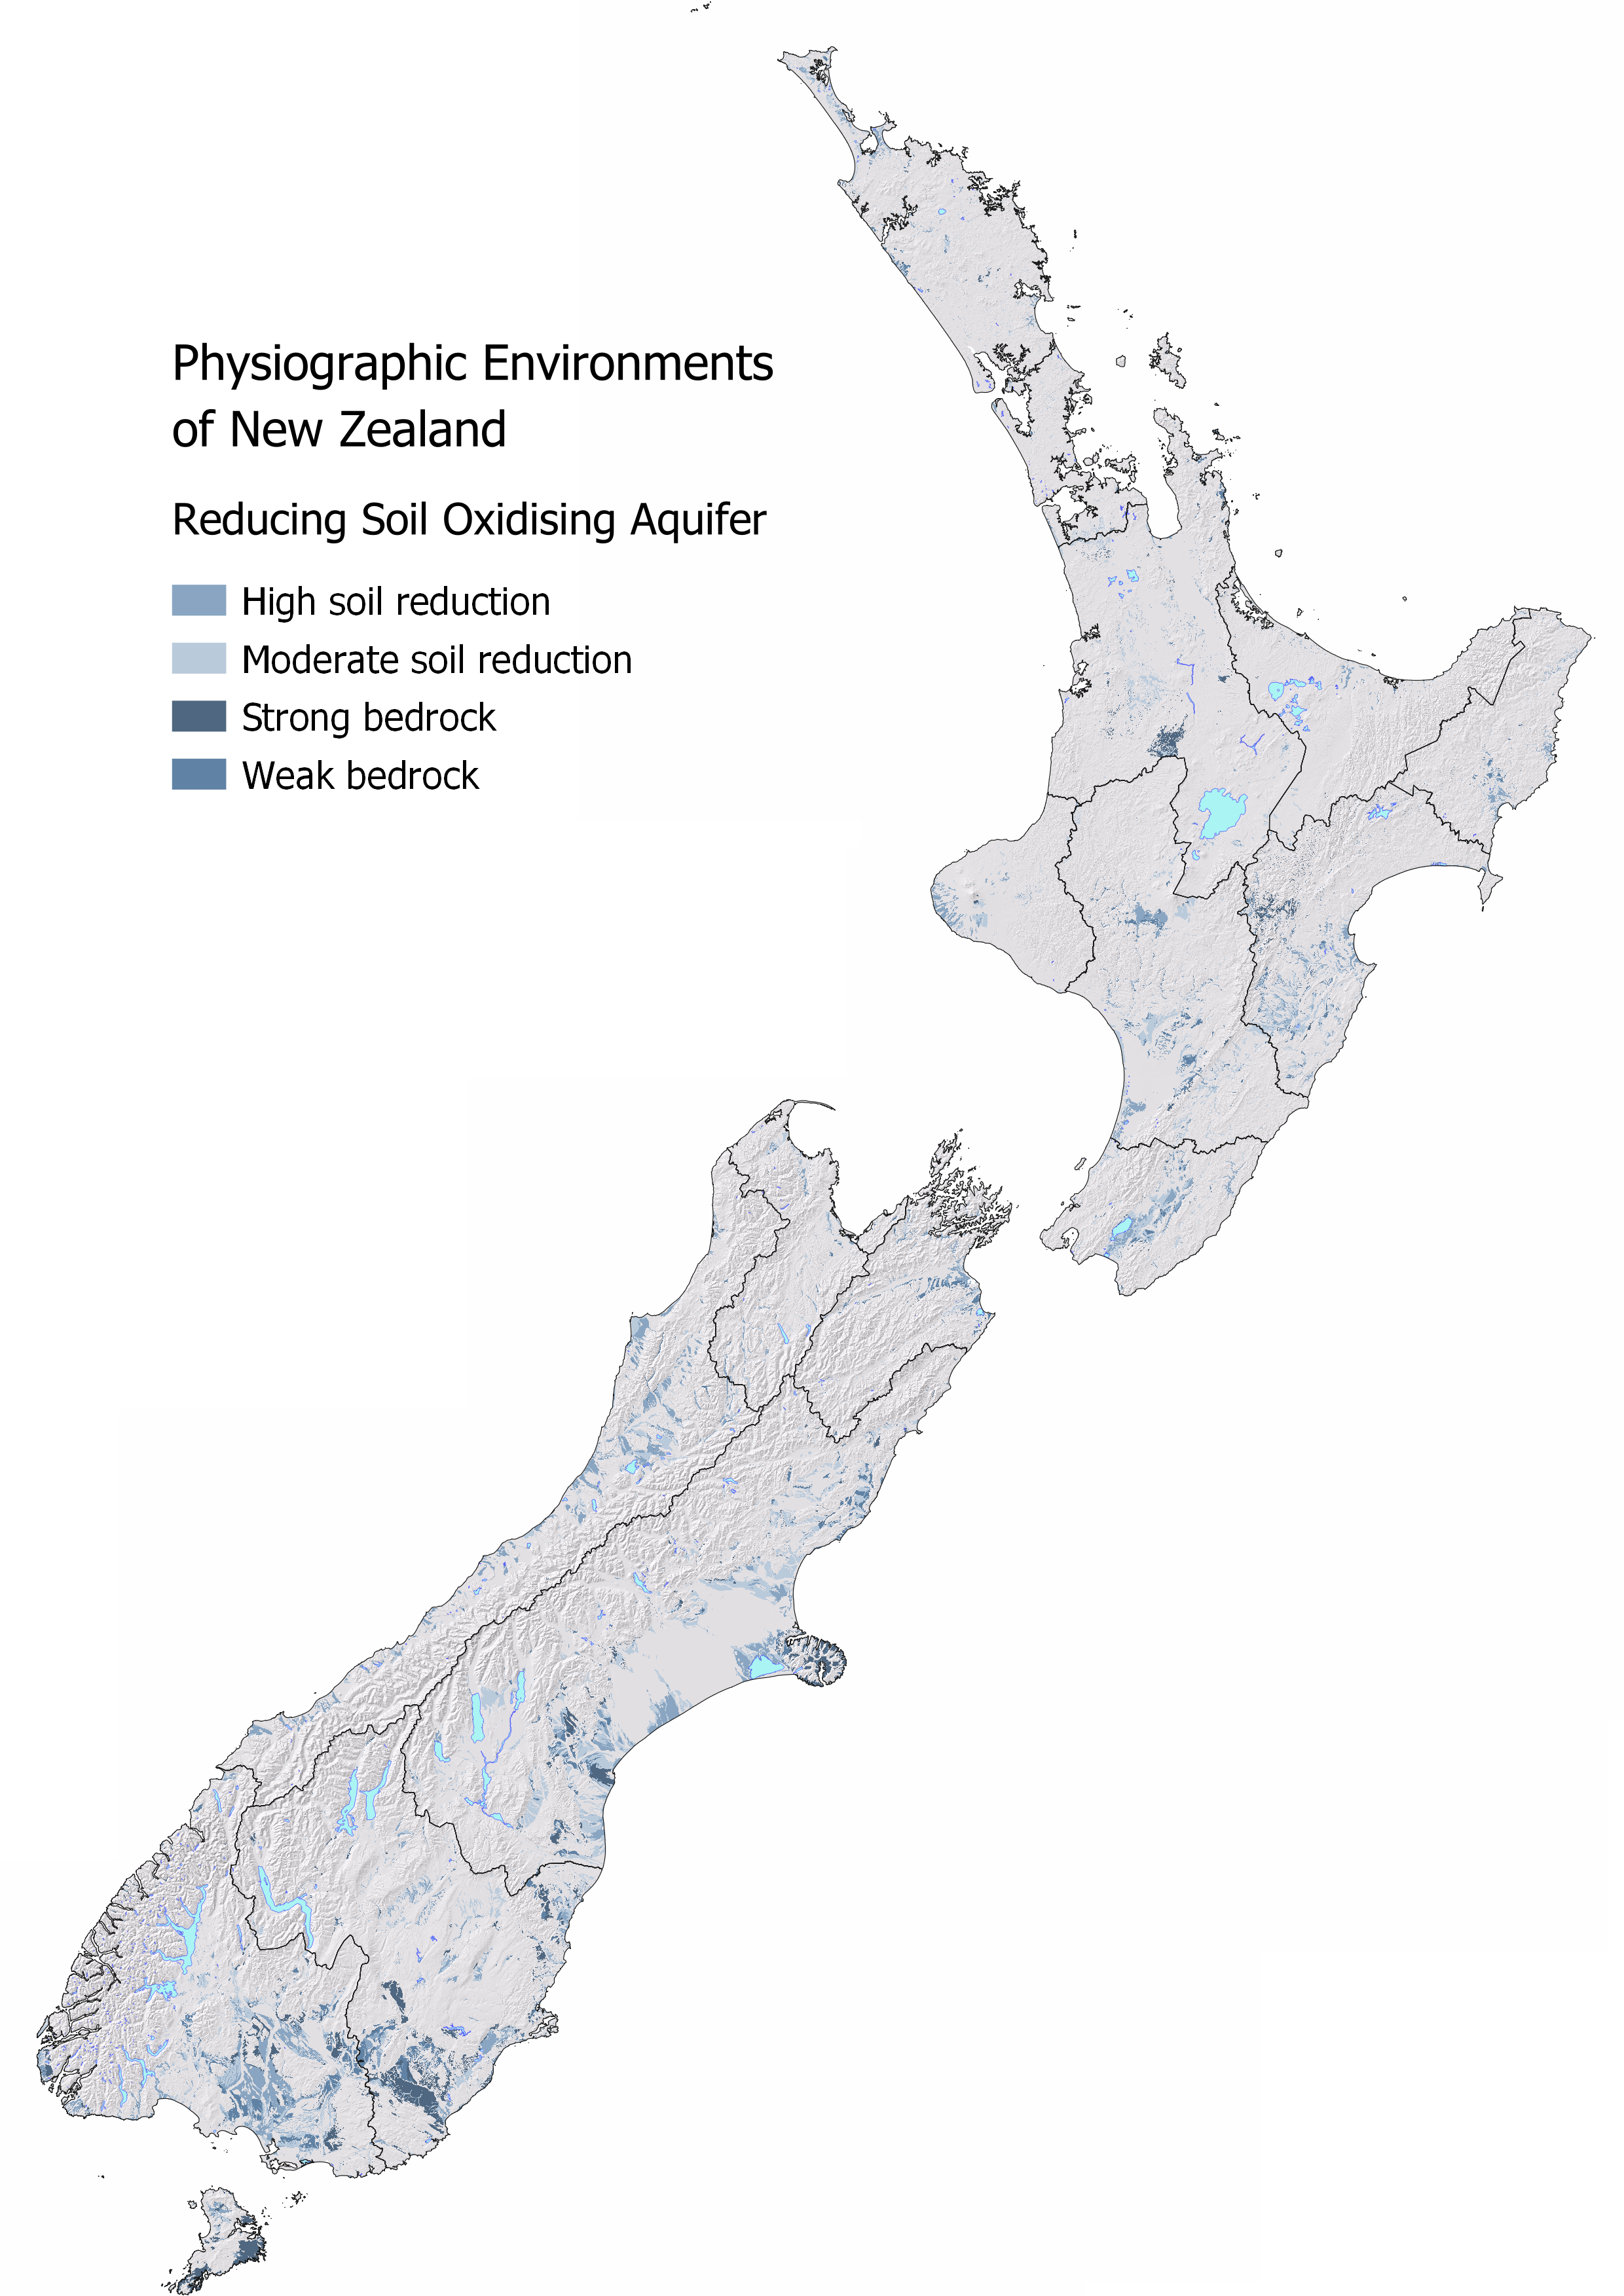 slope map of new zealand with the parts classified as 'Reducing Soil over Oxidising Aquifer' showing.